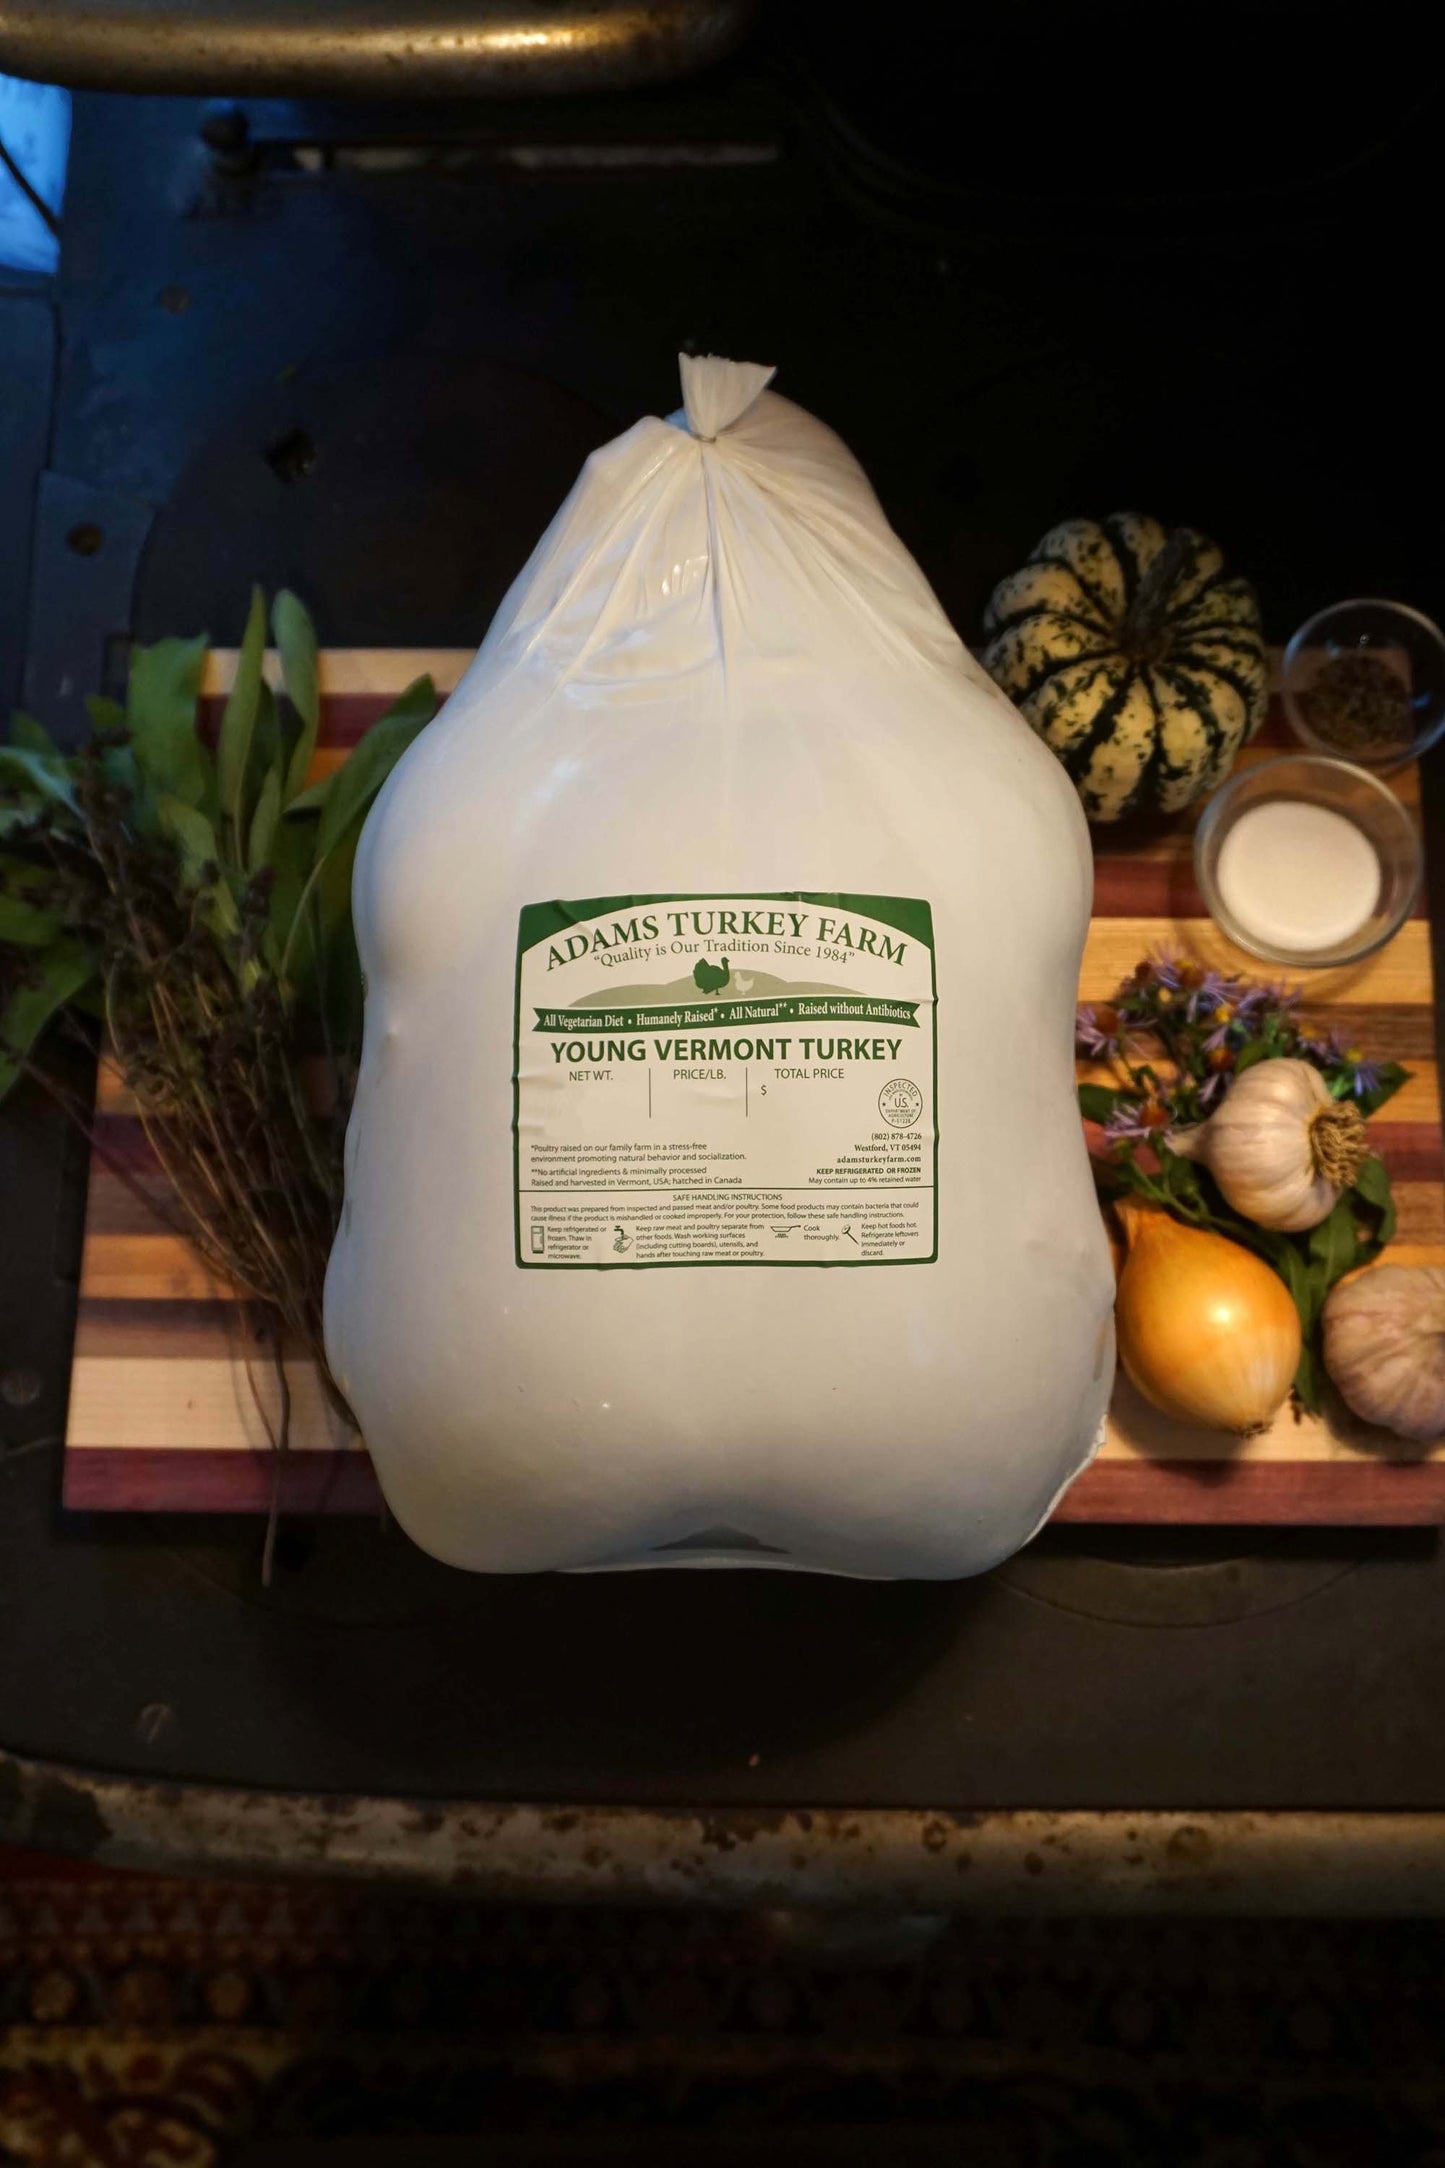 NOT SOLD OUT - Vermont Turkey Pre-Order COMING SOON!